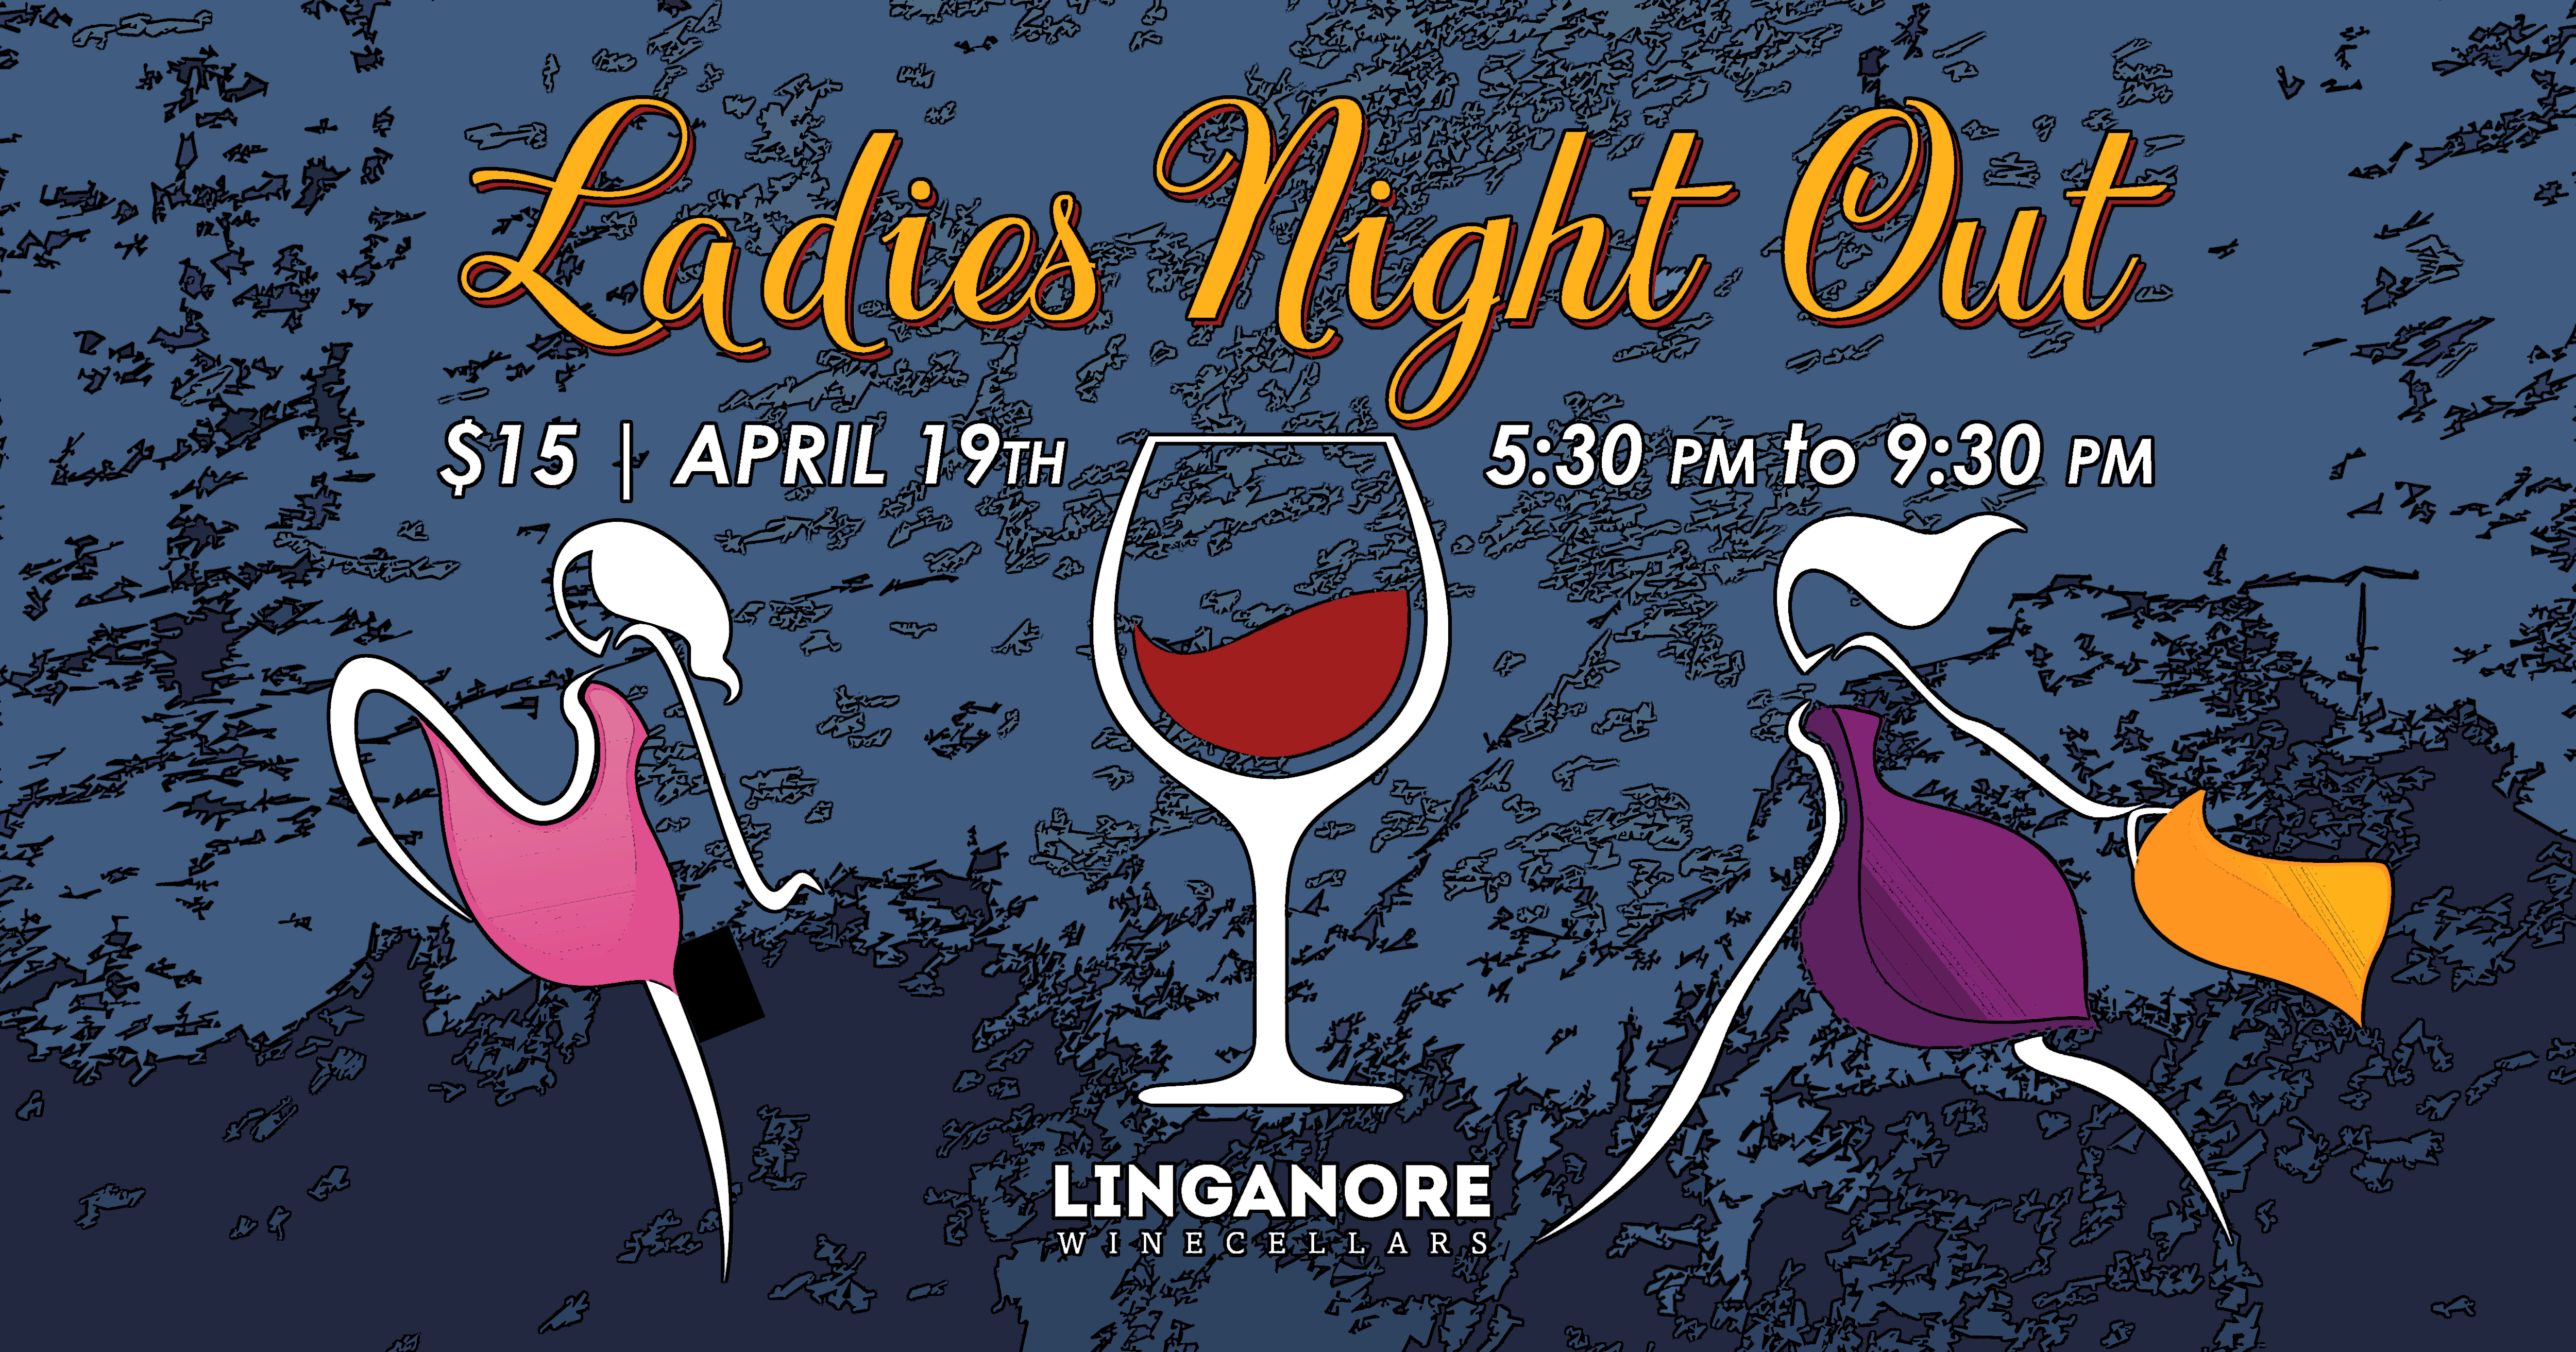 Ladis night out is april 19th